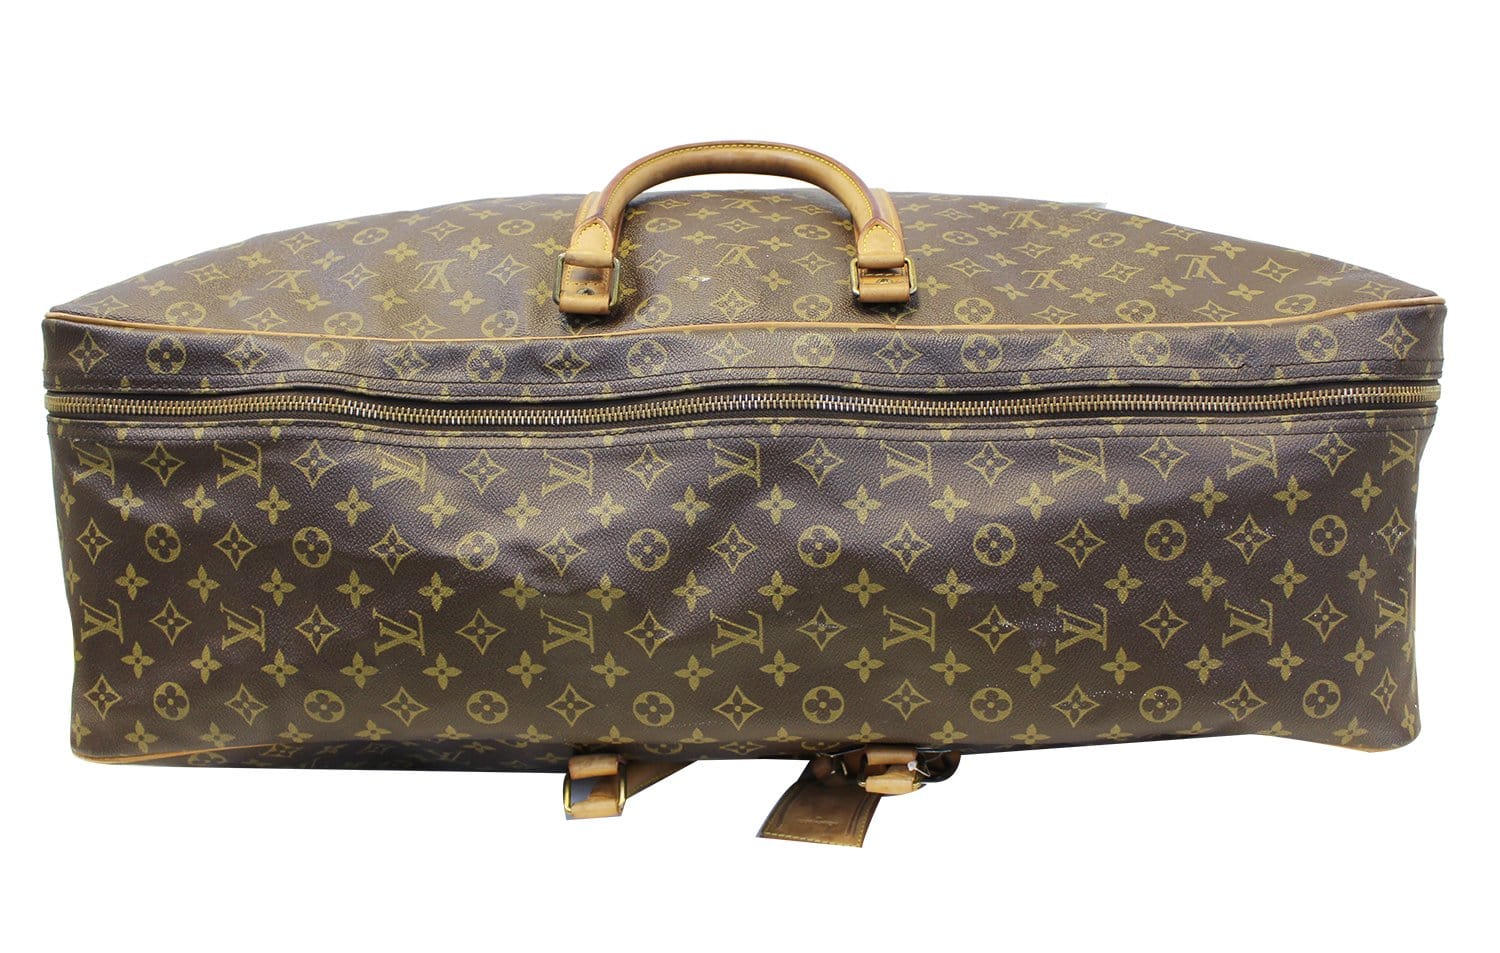 Monogram canvas and leather suitcase LOUIS VUITTON with …